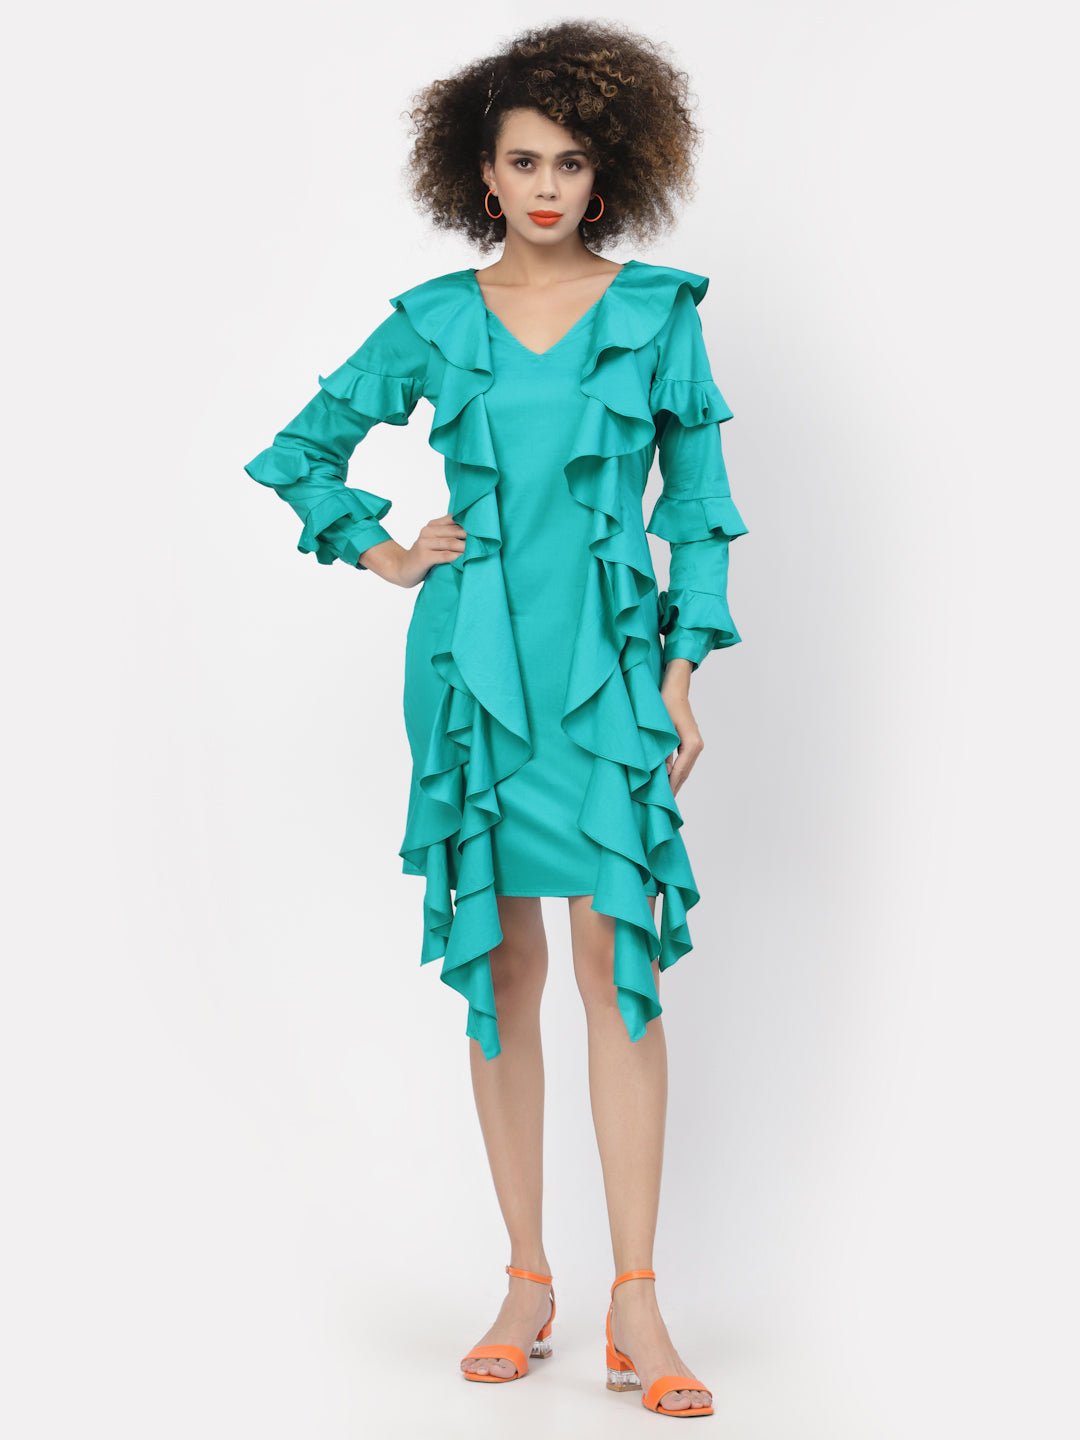 Turquoise Cotton Dress With Frill Sleeves & Tie Belt